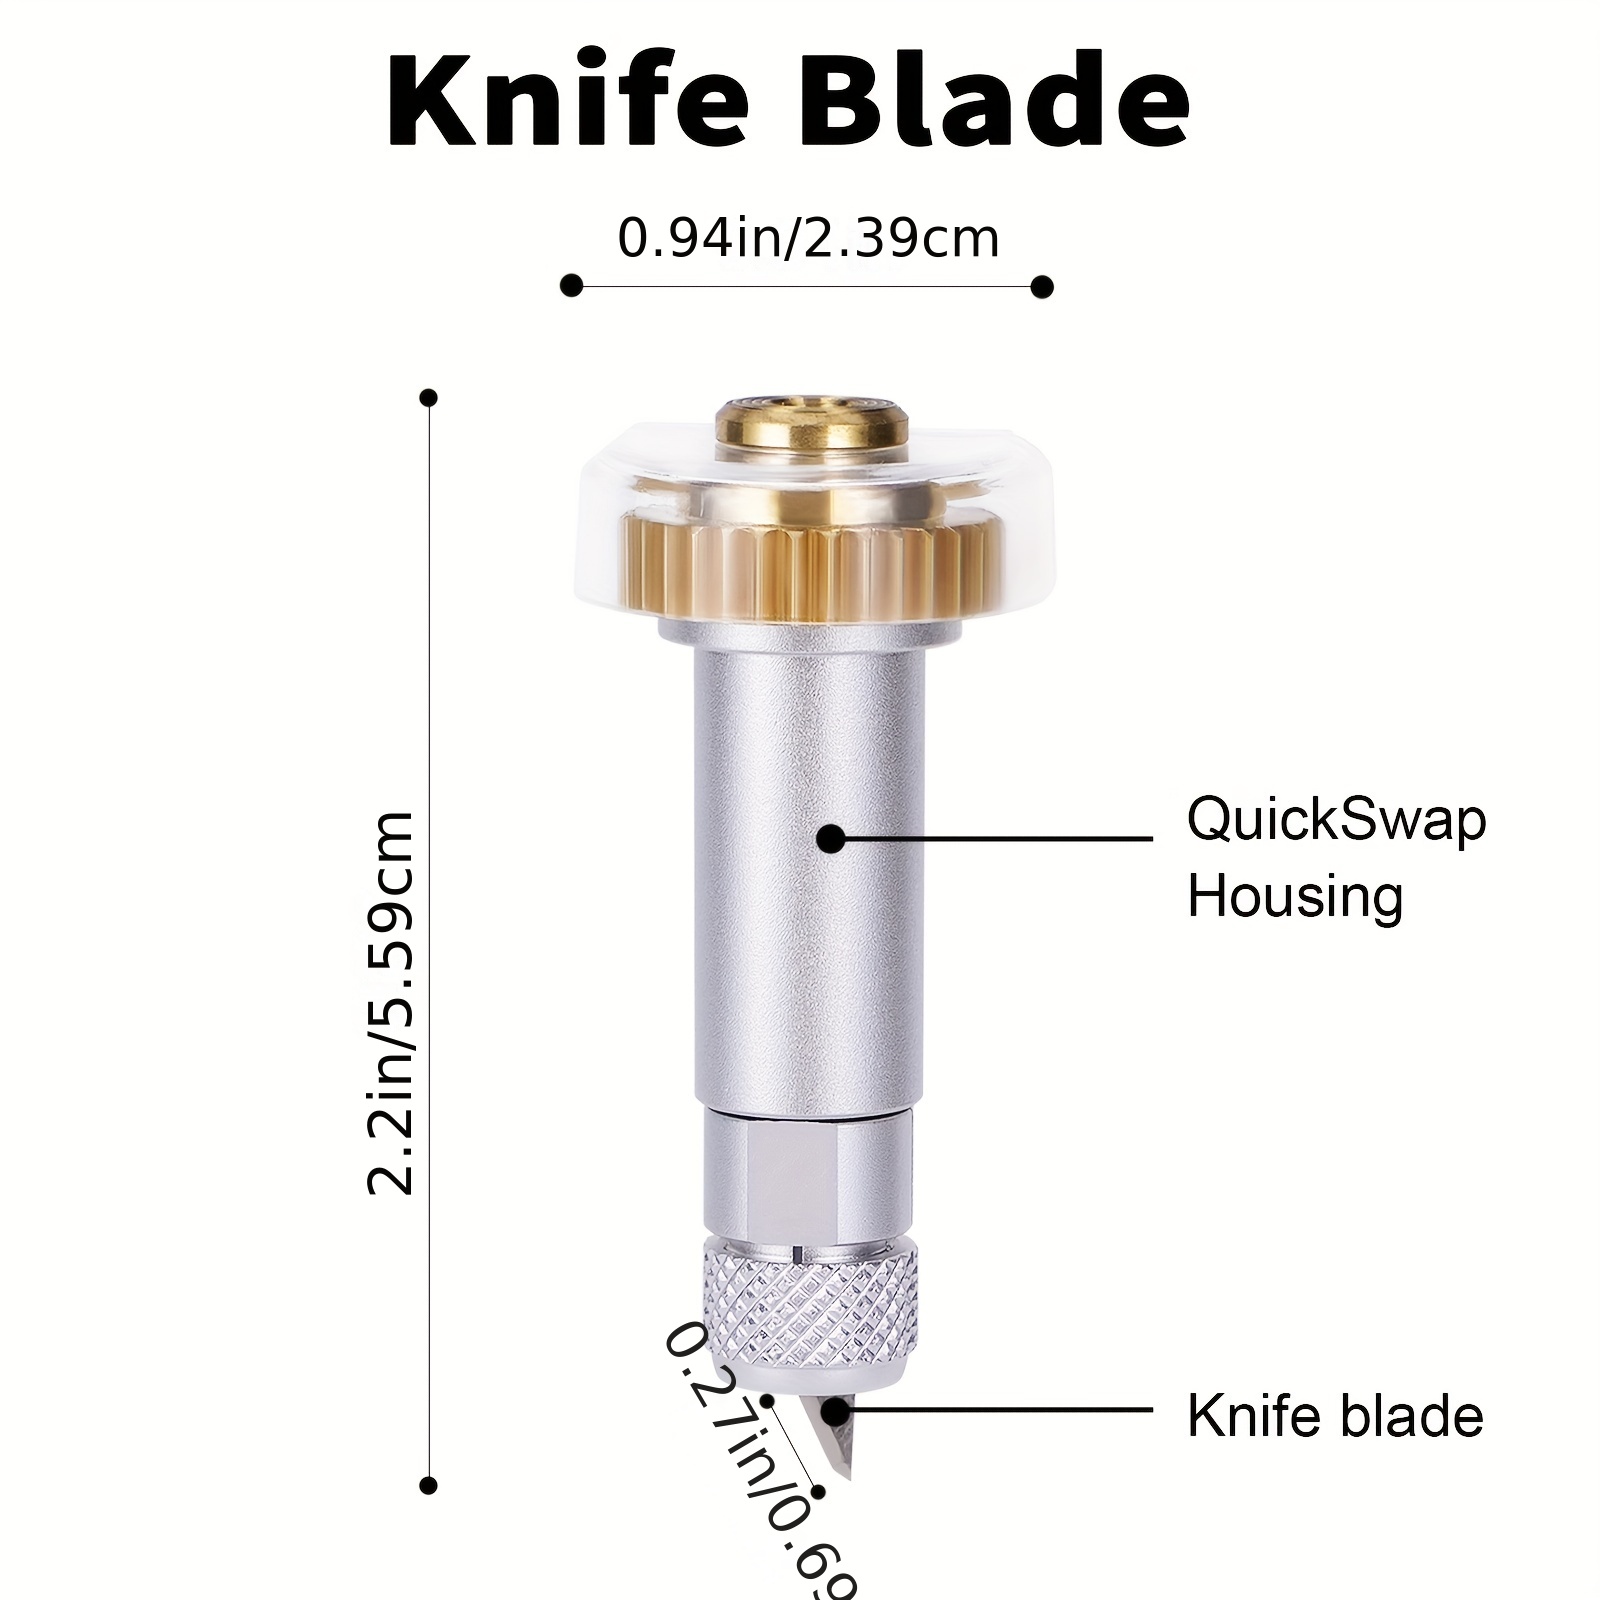 Cricut Knife Blade and Drive Housing, Hard and Durable Cutting Blade, Cuts  Wood, Leather, Chipboard & More, Create Puzzles, Models, Leather Goods